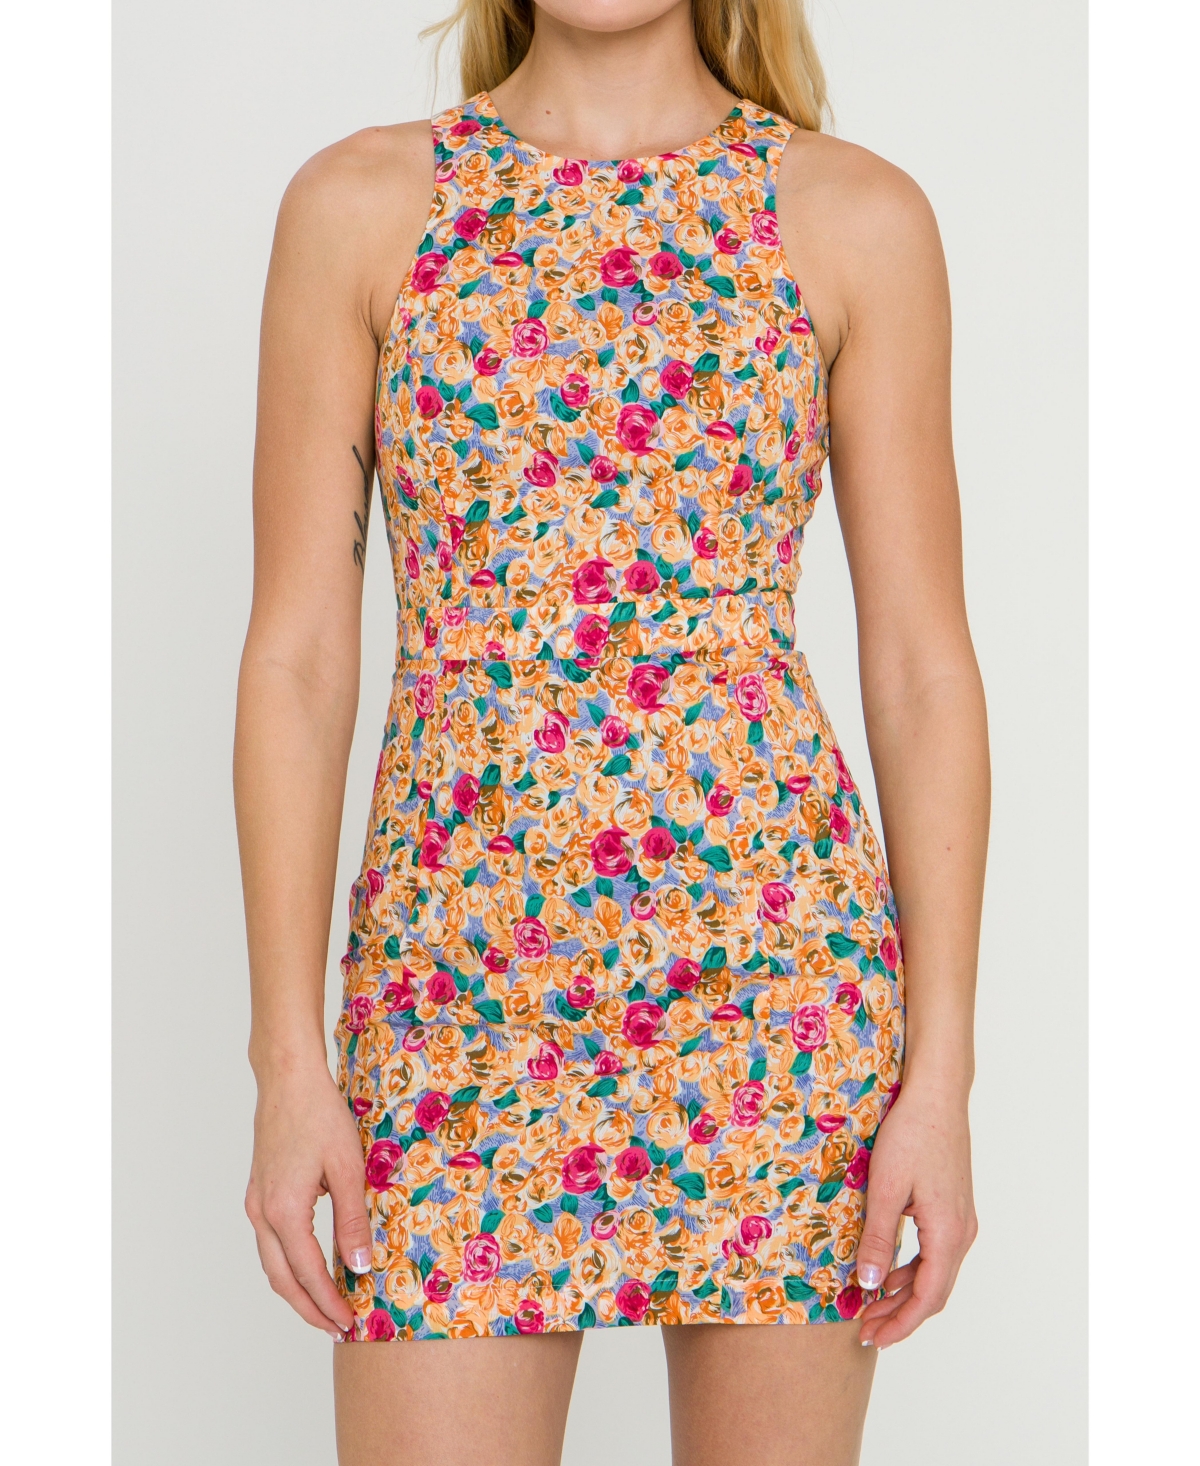 Women's Floral Fitted Mini Dress - Multi